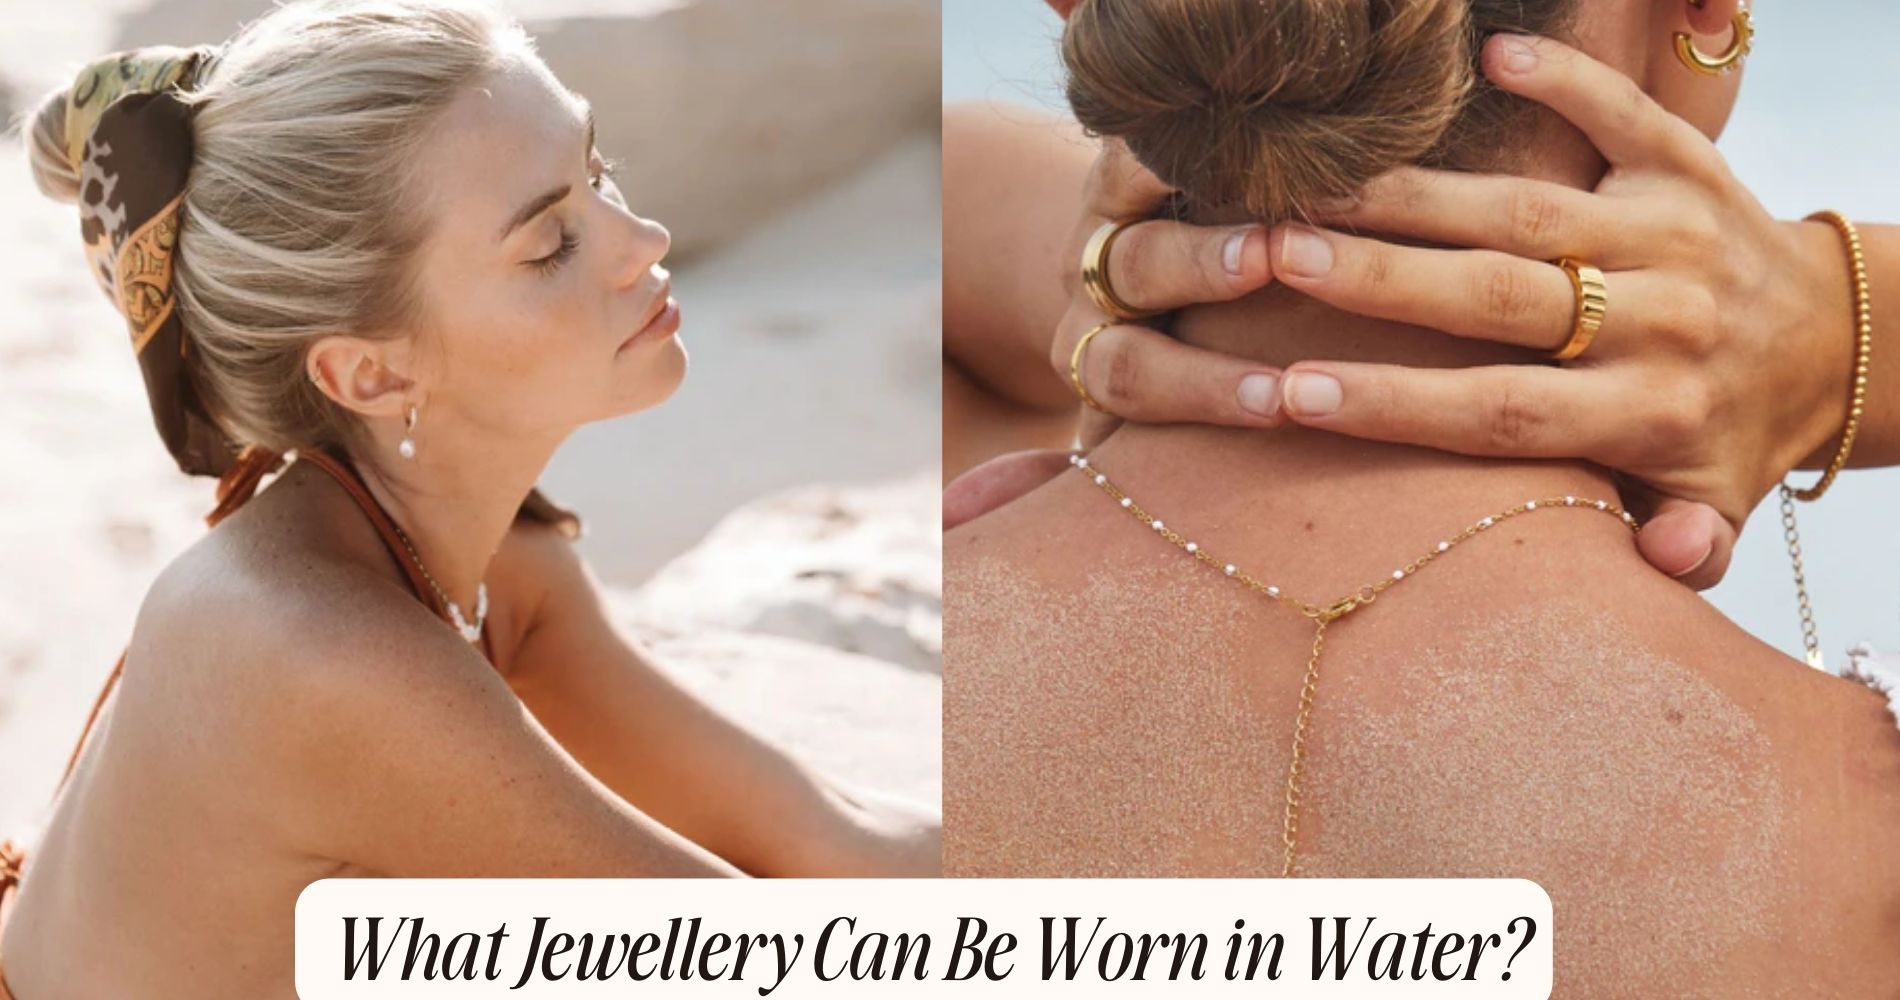 What jewellery can be worn in water?